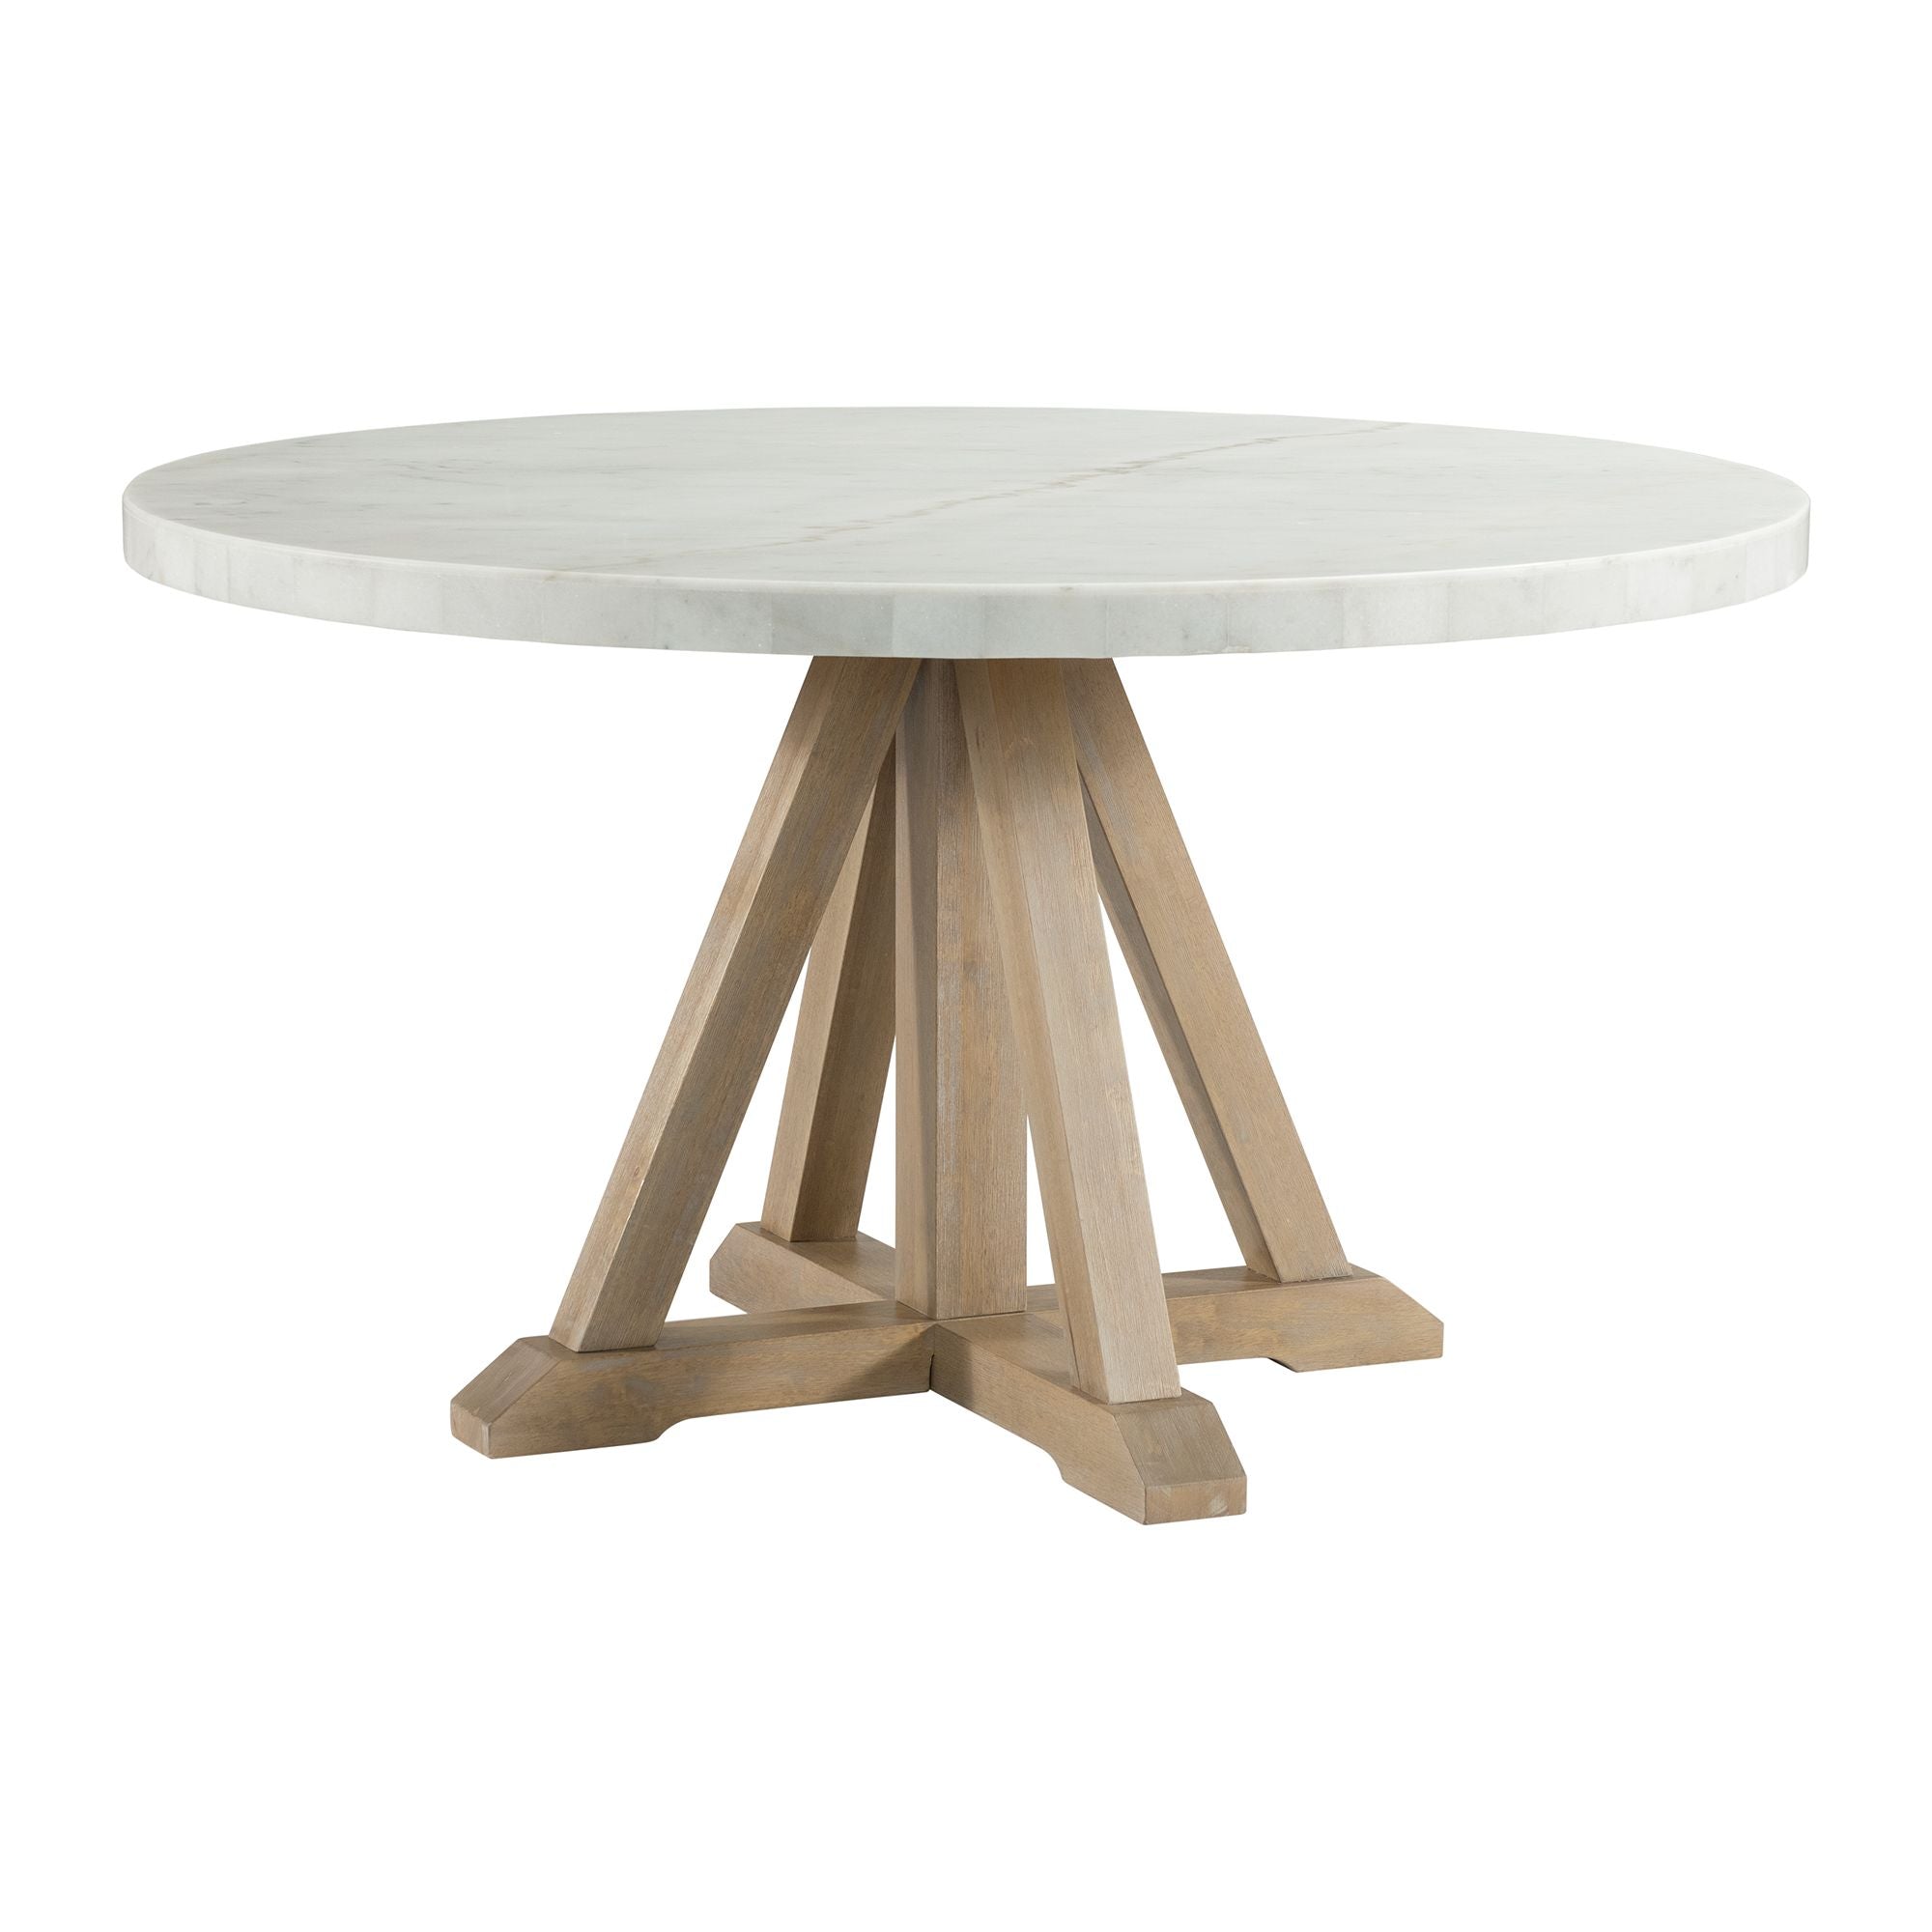 Lakeford White Marble Round Top Table